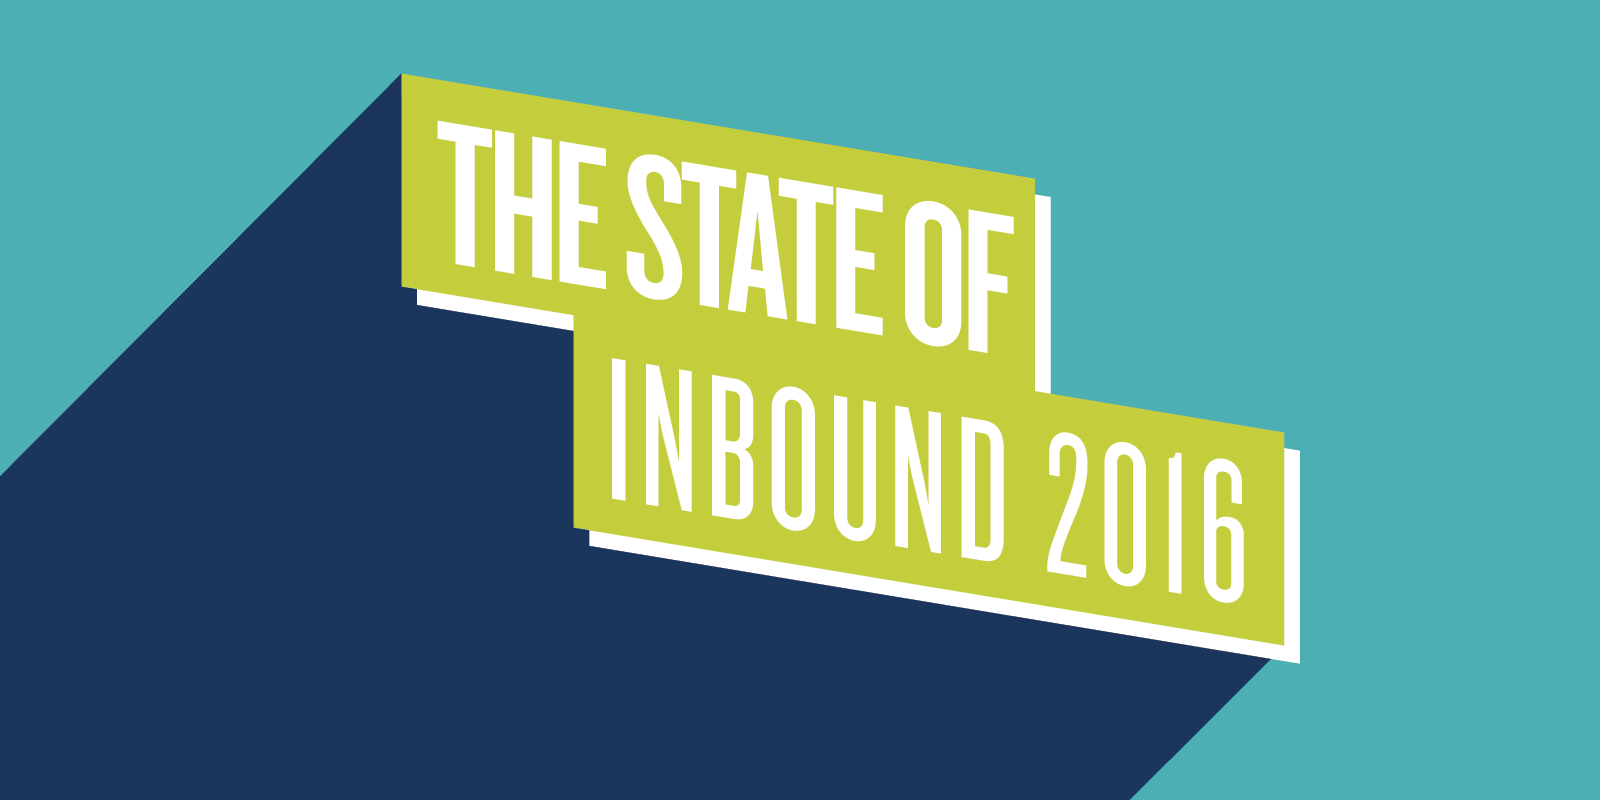 There’s a Social Evolution Happening in LATAM According to HubSpot’s State of Inbound 2016 Report